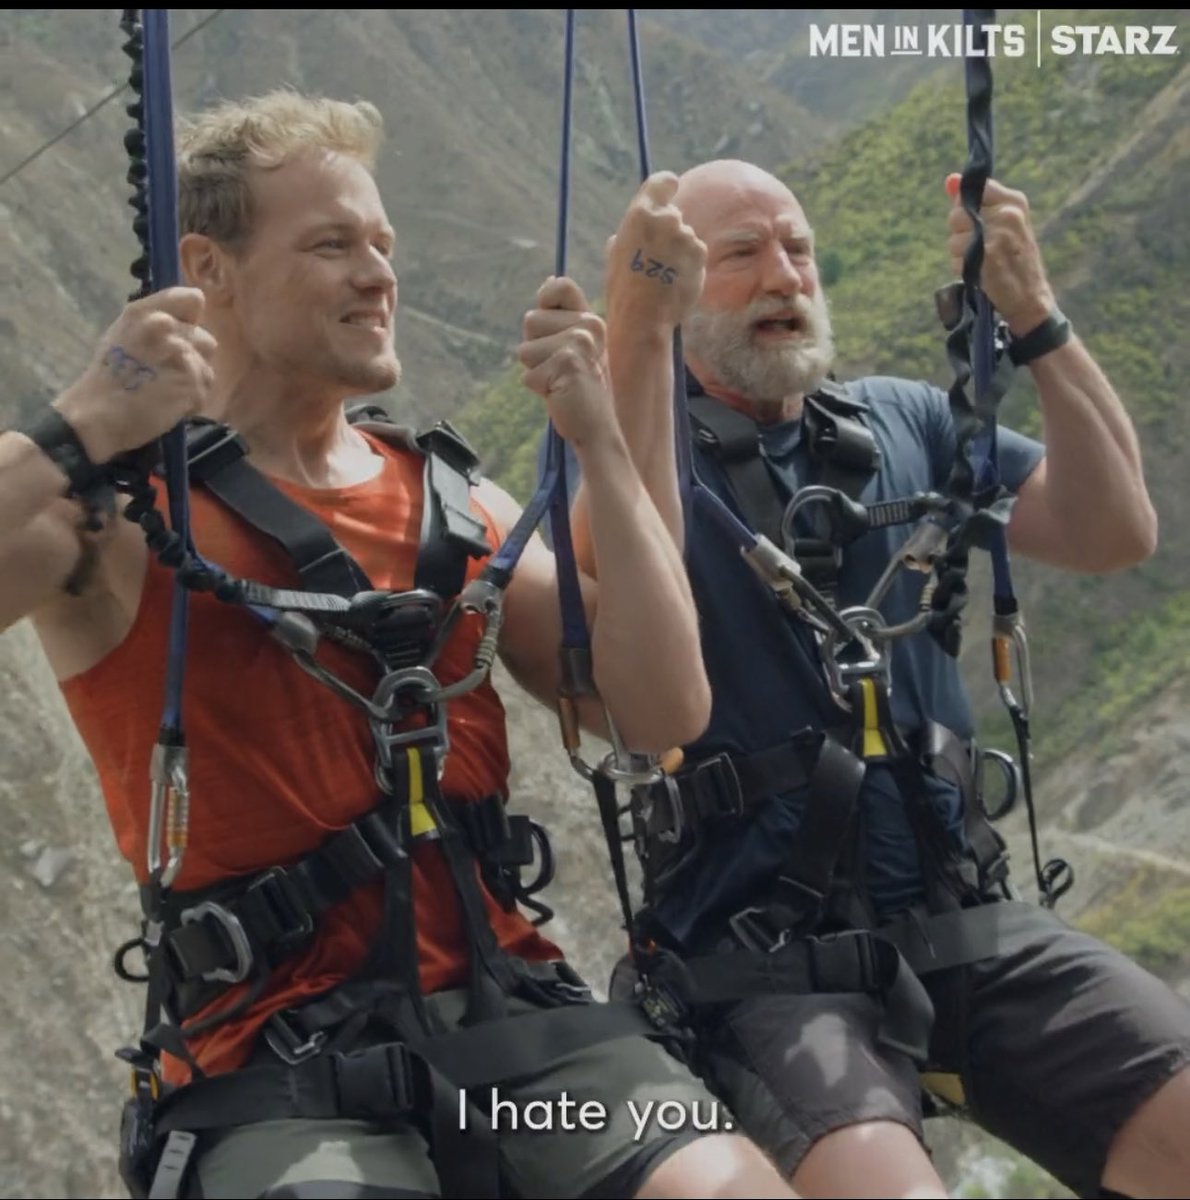 I haven’t stopped smiling and laughing, since I watched this hilariously FUN Trailer for #MeninKiltsNZ!  You two #Scottish Blokes are my favorite #ComedyTeam of “Sam & Graham”, and August 11th can’t arrive soon enough, on @STARZ.  
#SamHeughan
#GrahamMcTavish 
☝️😂🆘🤣👌‼️